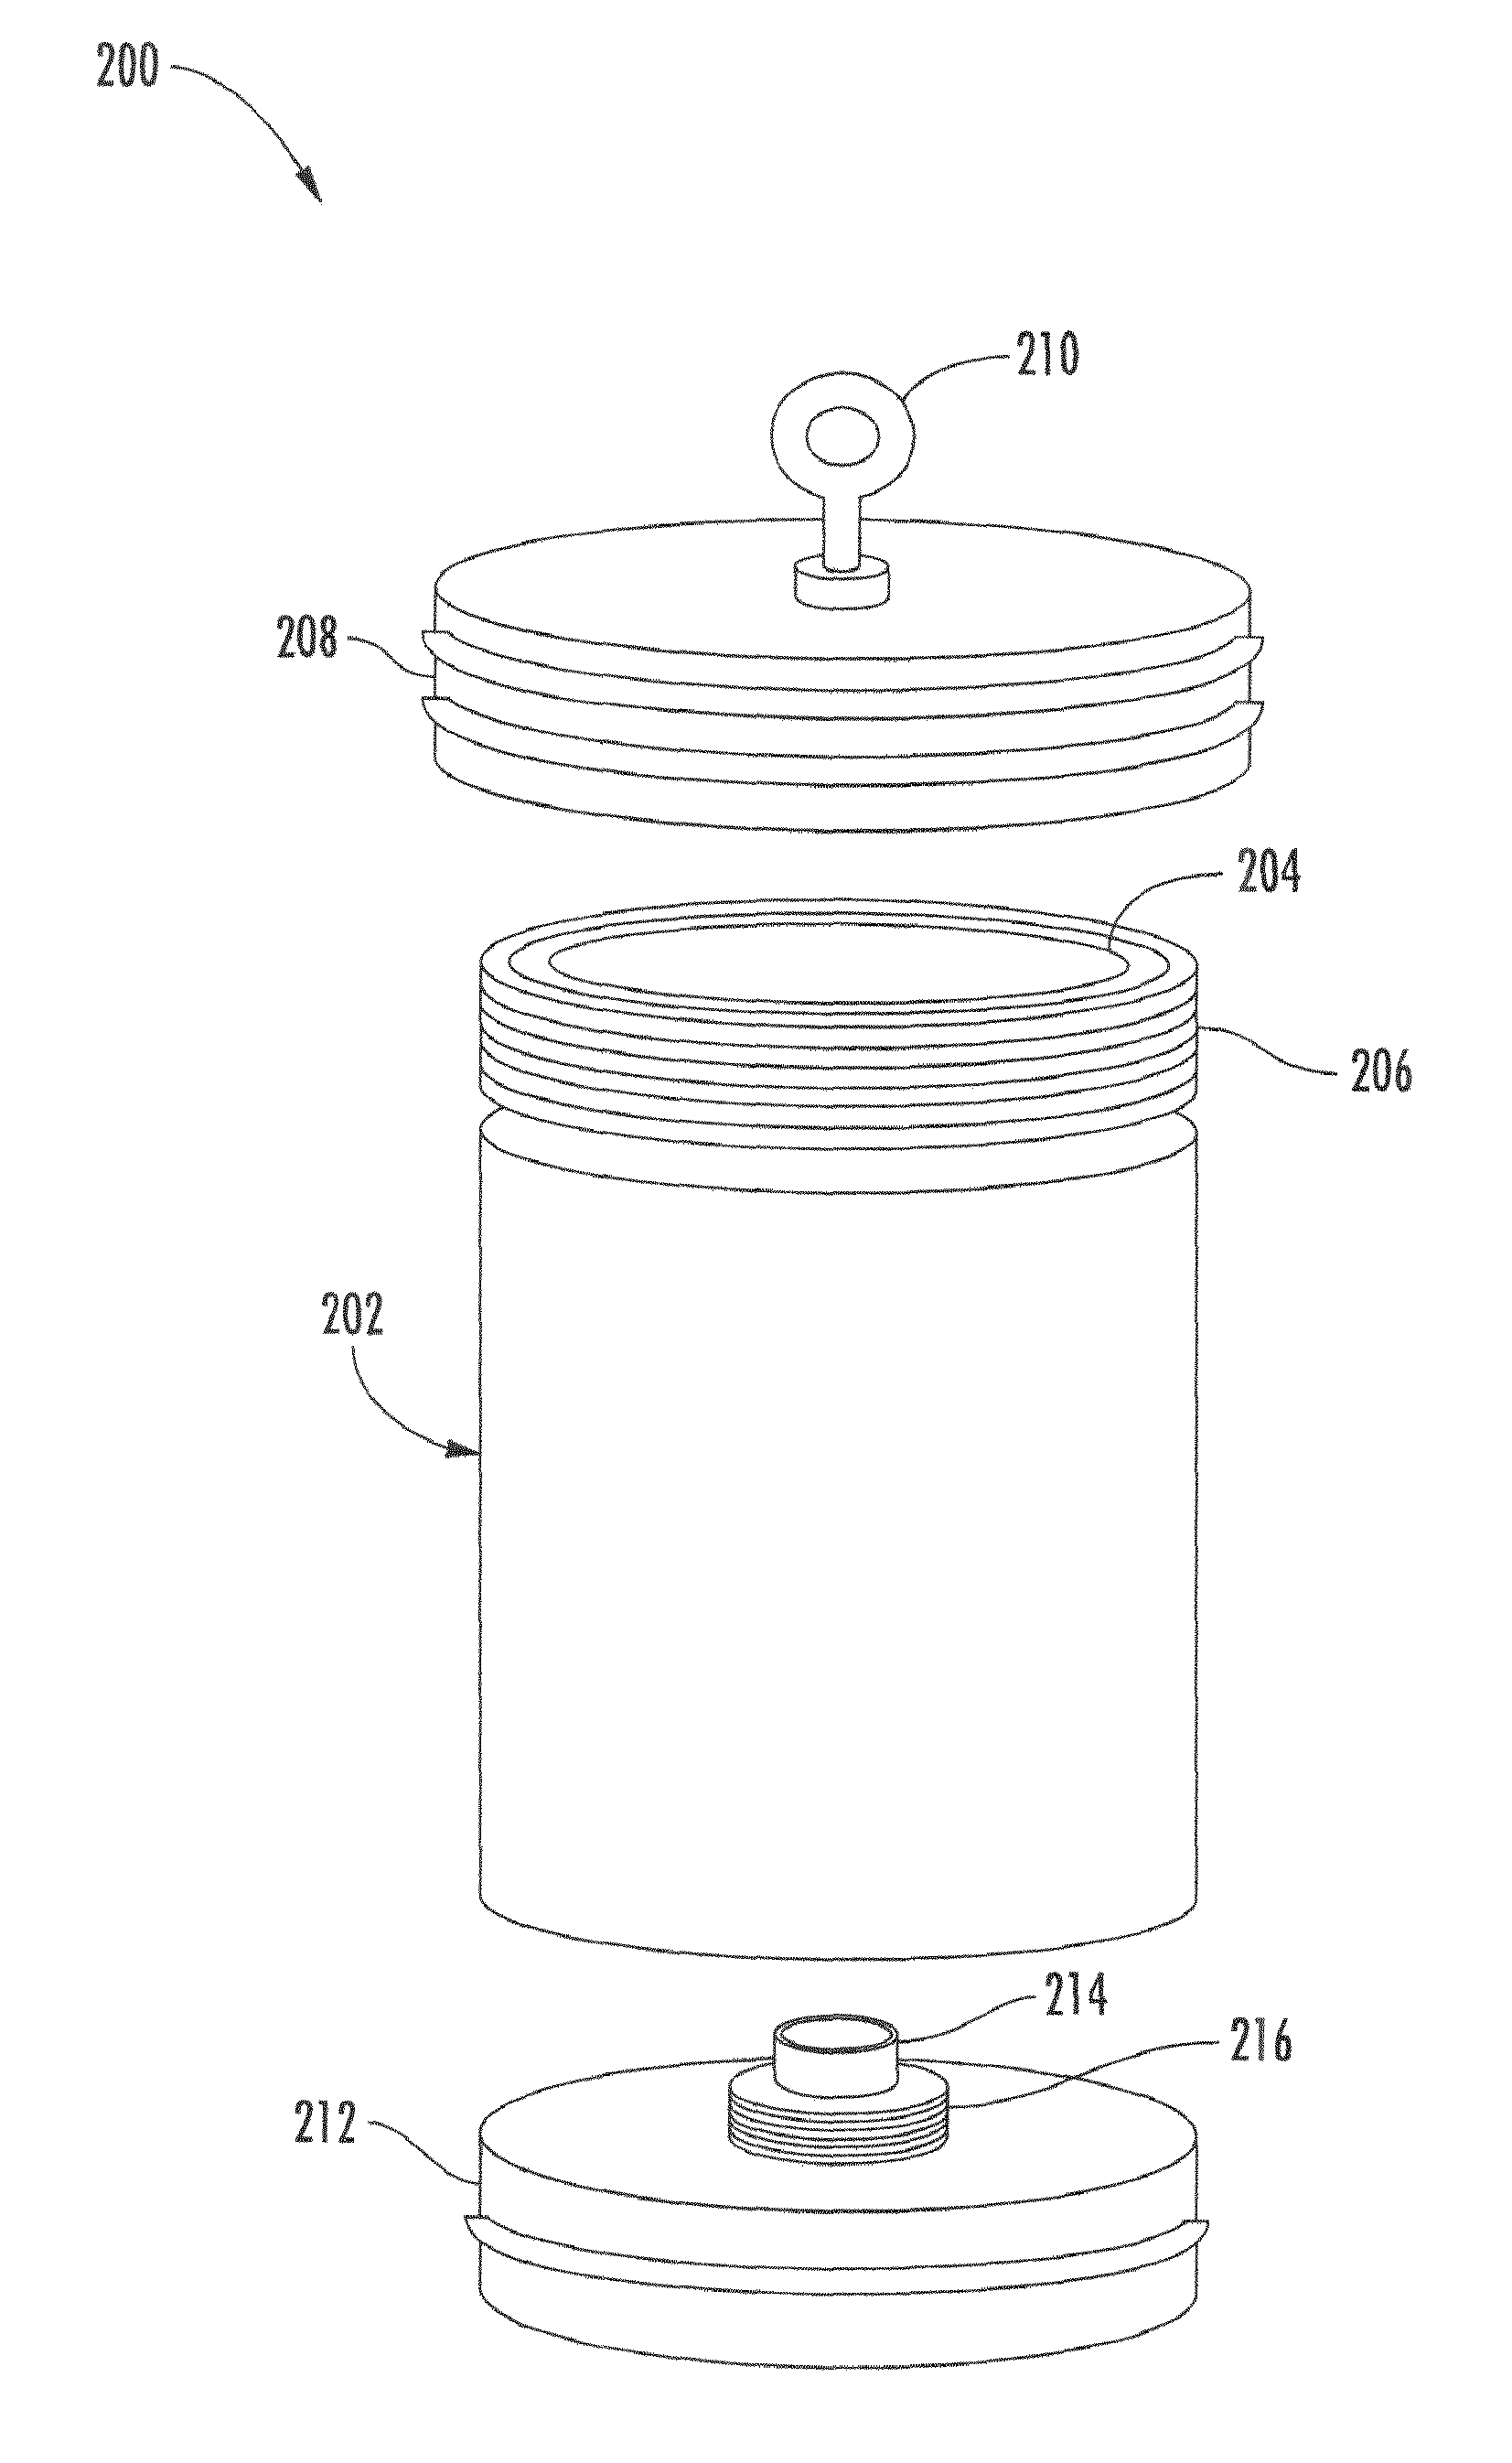 Radiolabeled treatment infusion system, apparatus, and methods of using the same